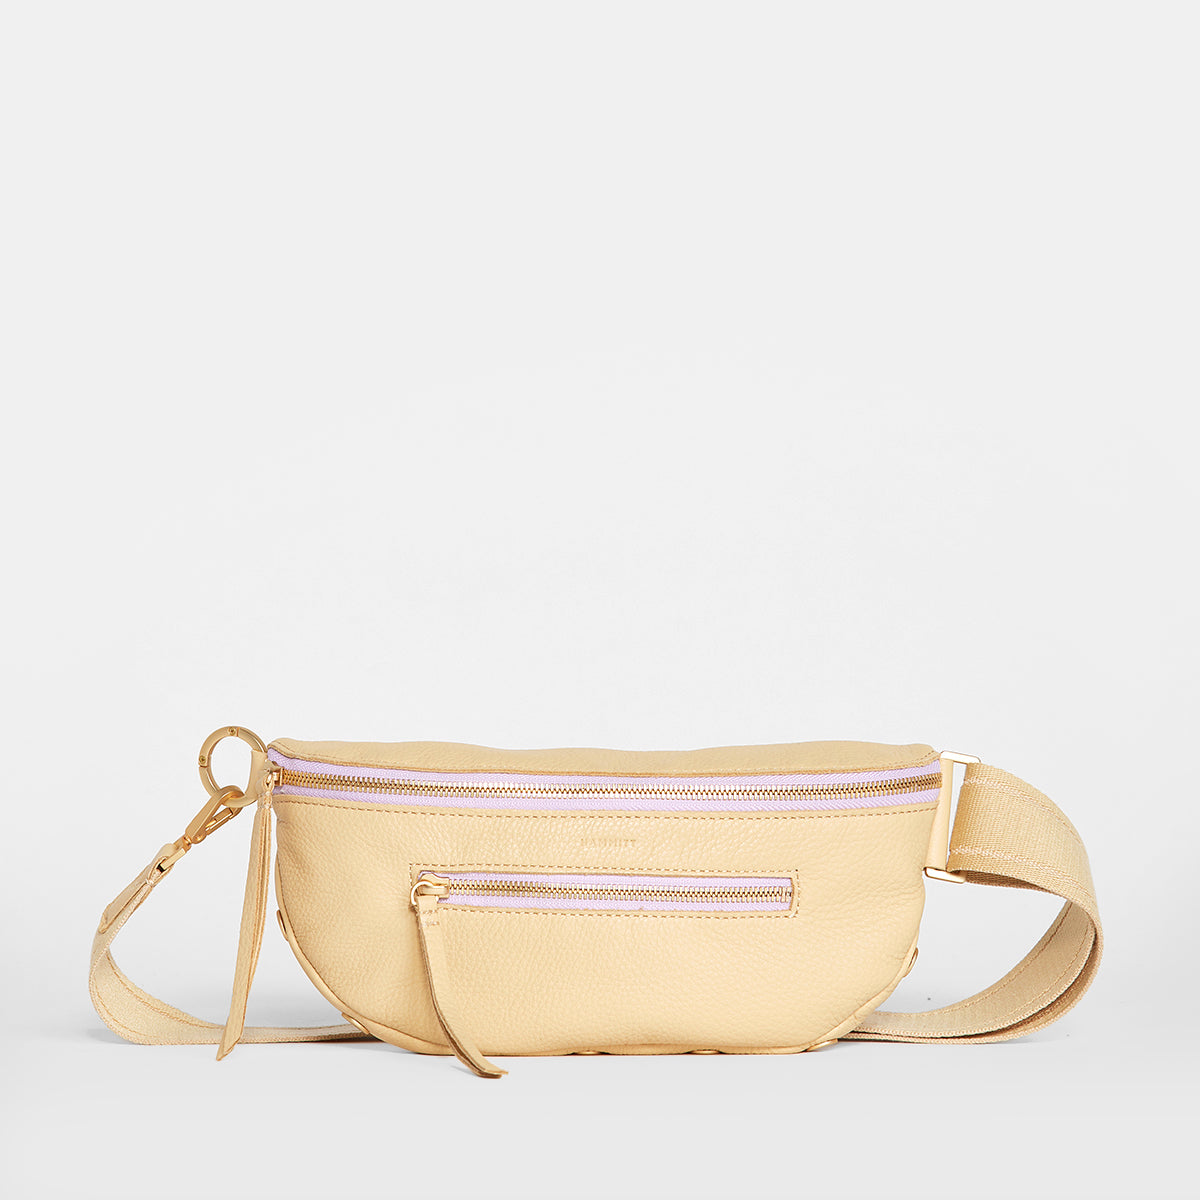 Charles-Crossbody-Med-Sandcastle-Front-View